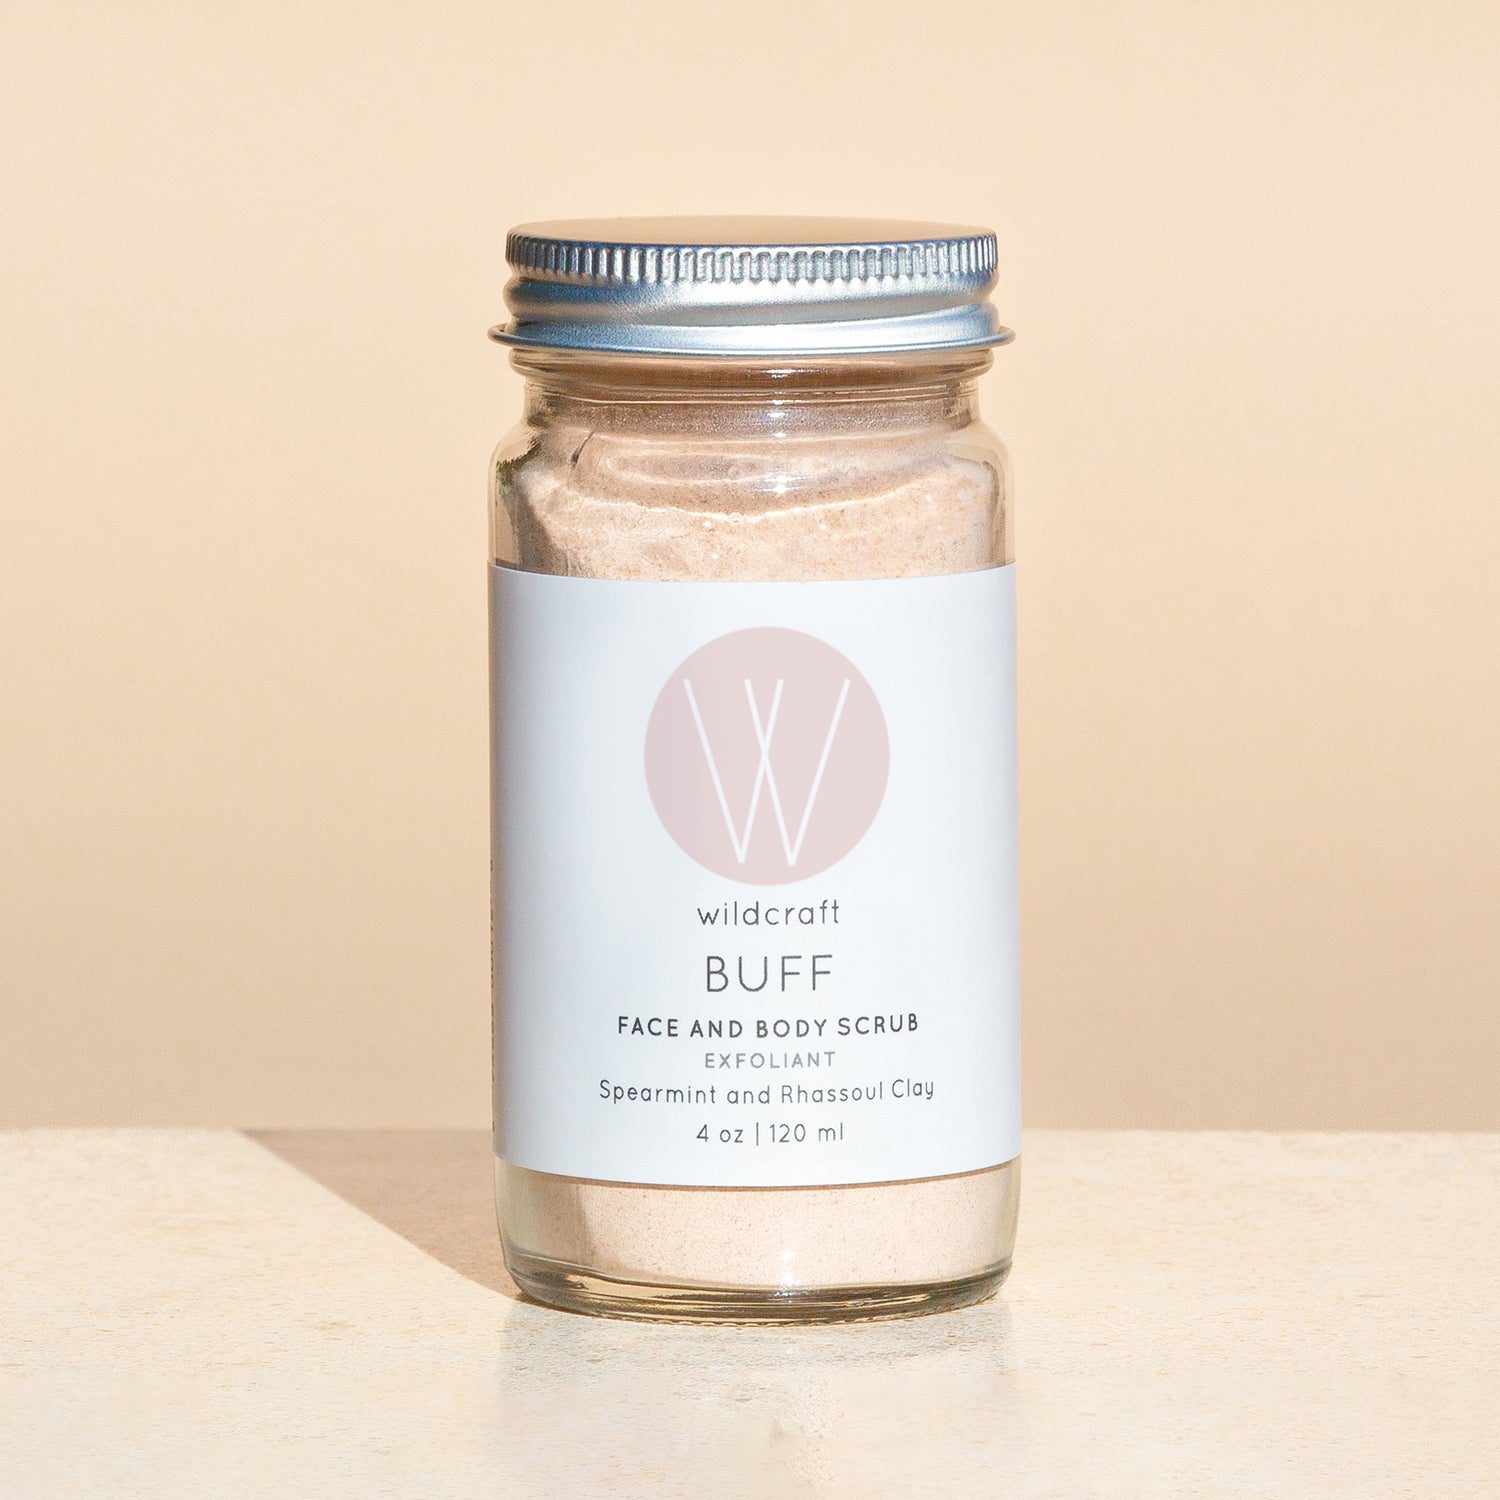 Buff Face and Body Scrub on a simple background